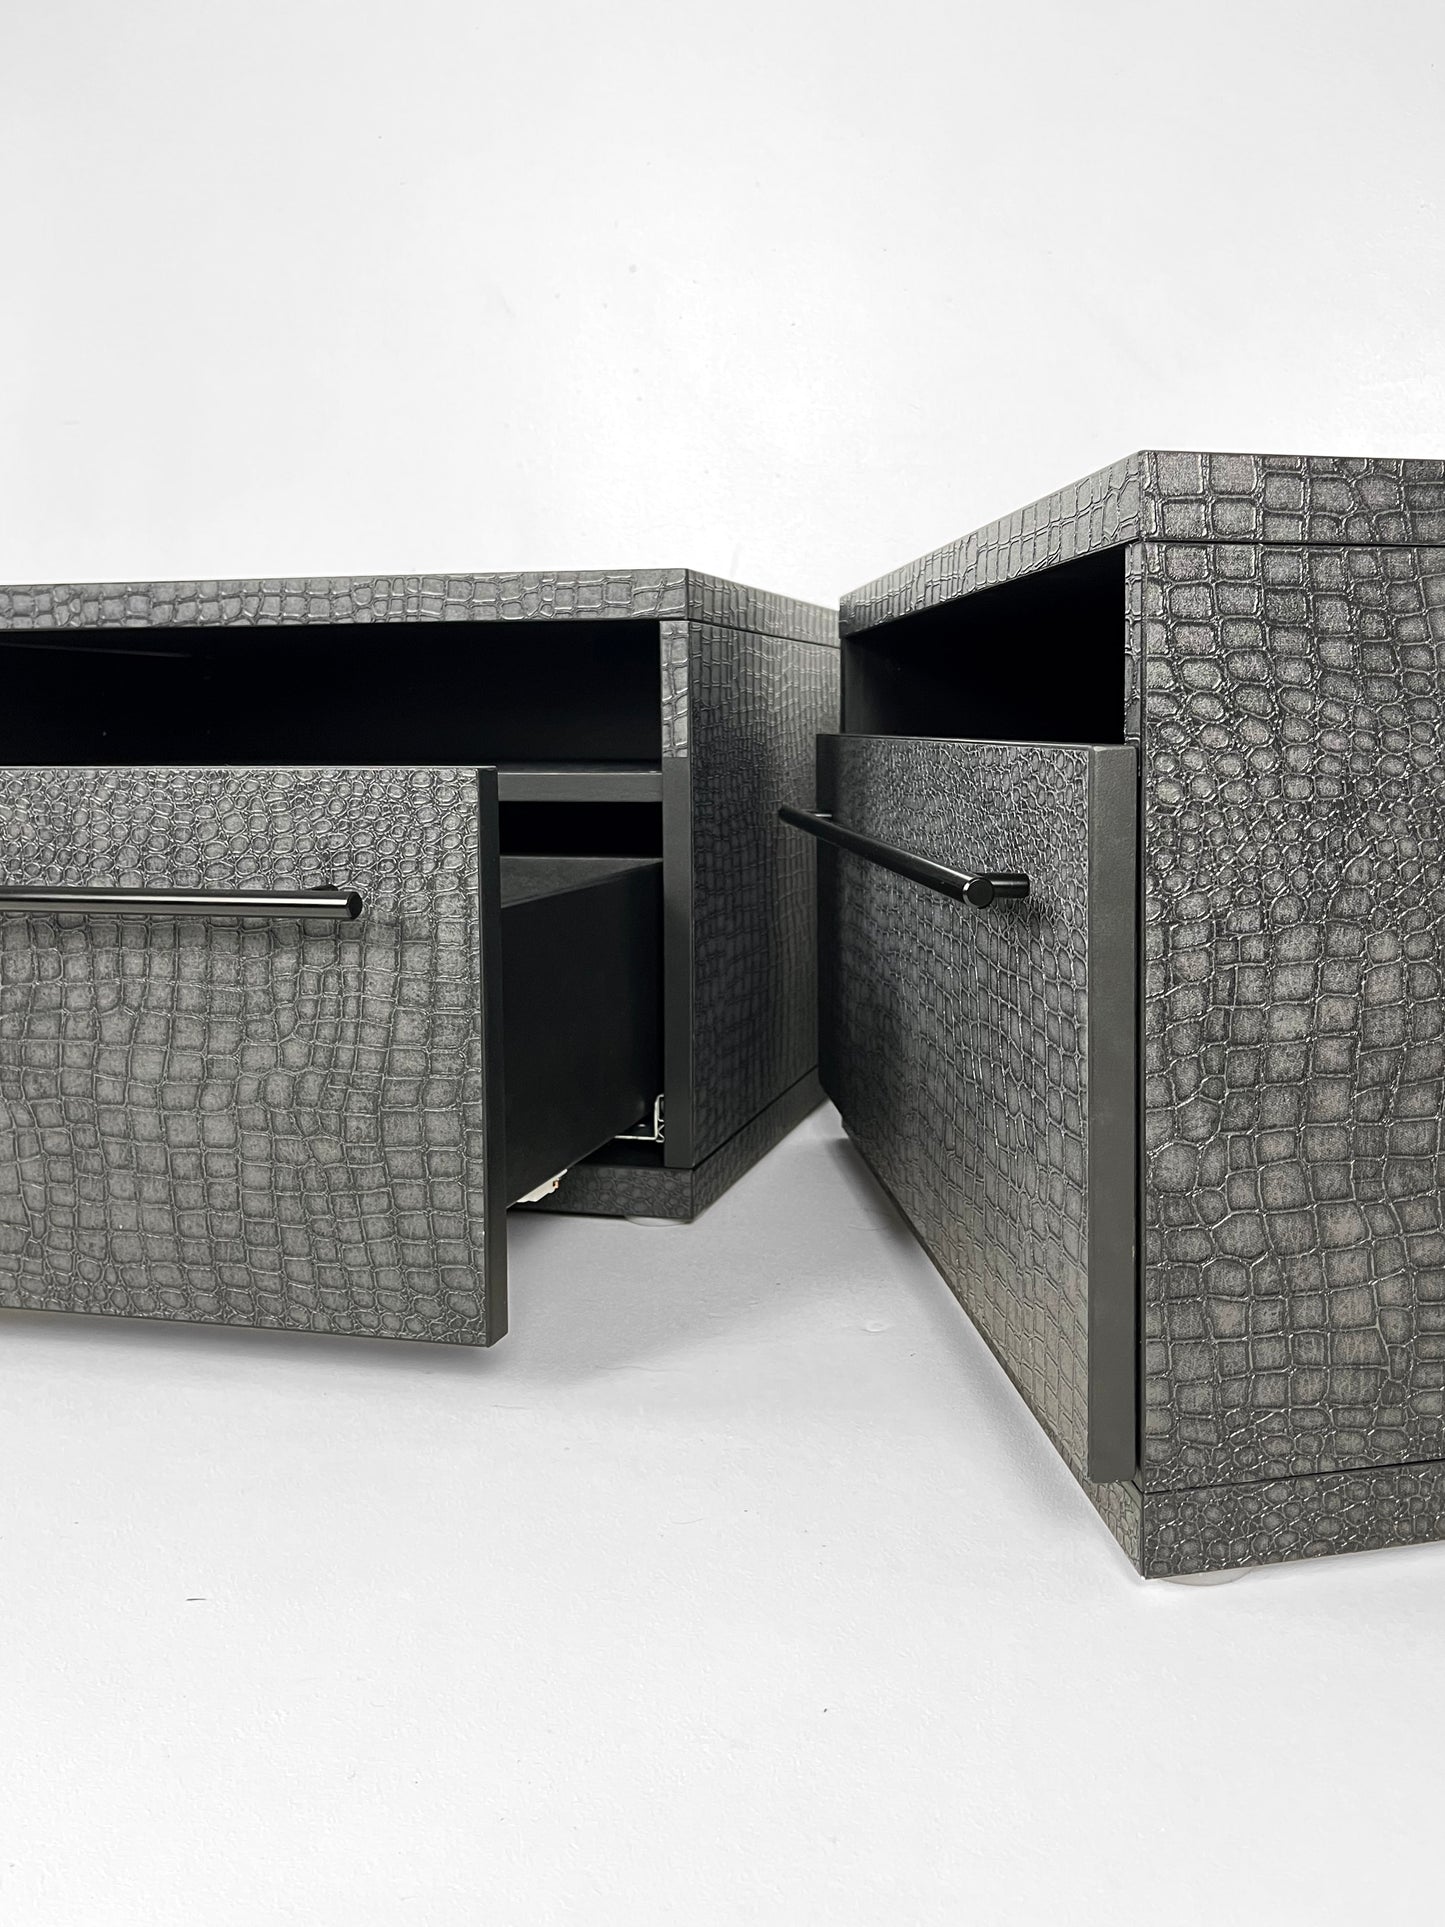 Upcycled Ikea bedside cabinets painted black with textured snakeskin pattern